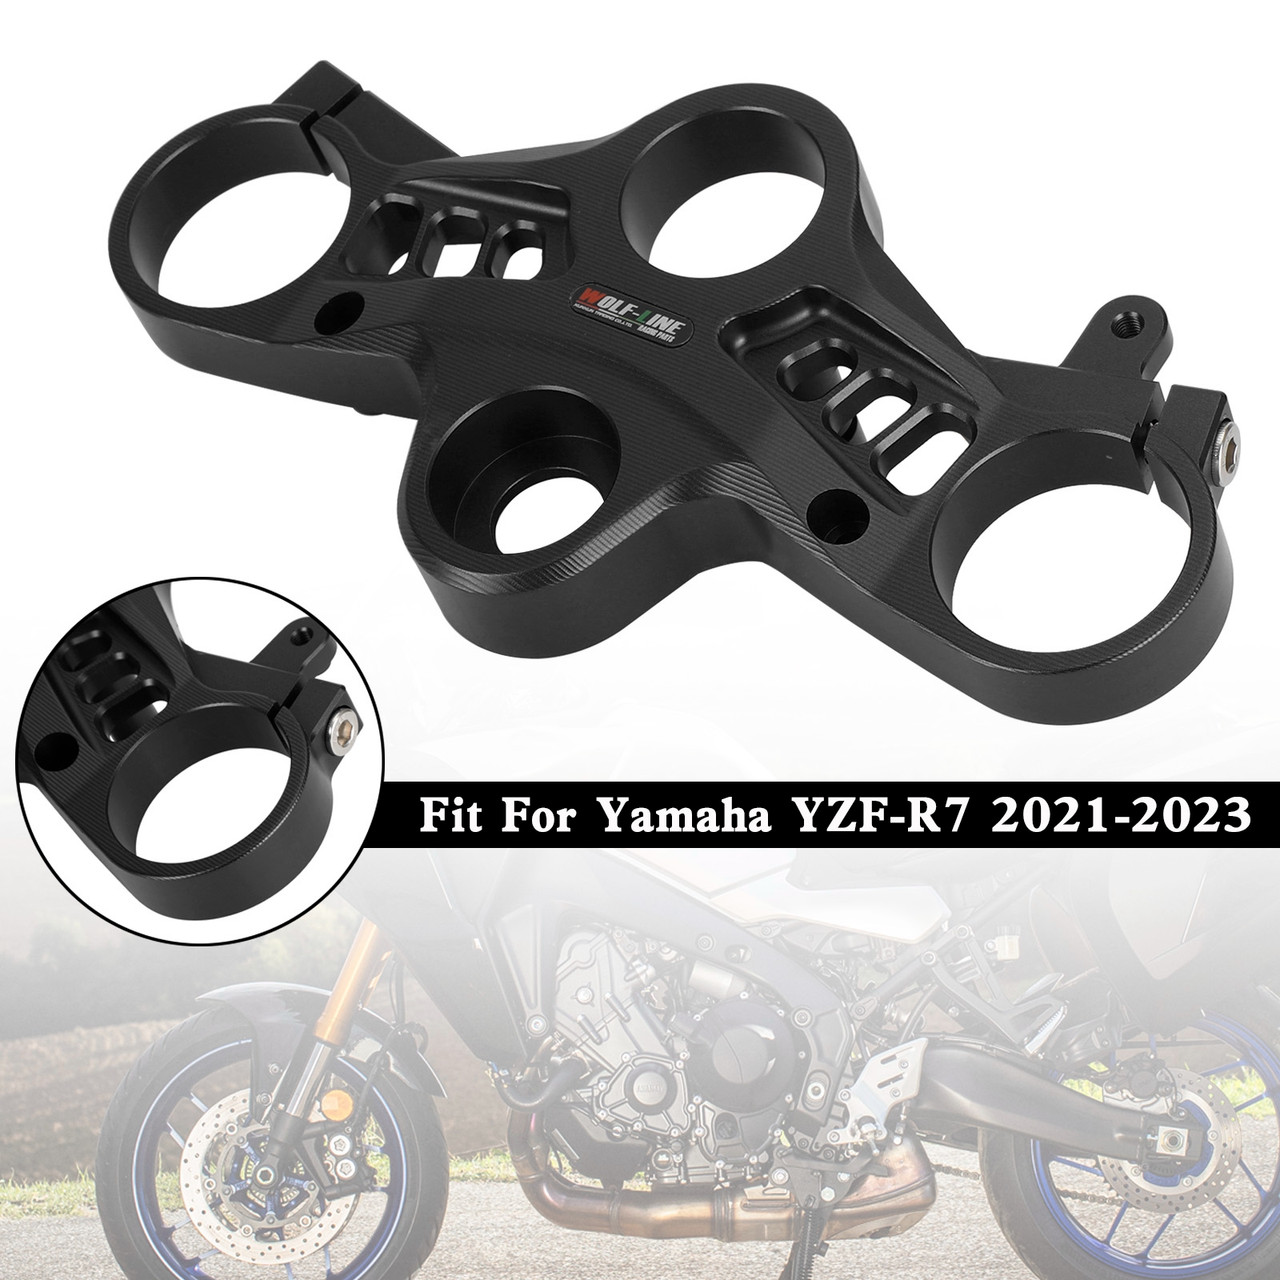 Yamaha YZF-R7 2021-2023 Upper Front Top Triple Tree Clamp